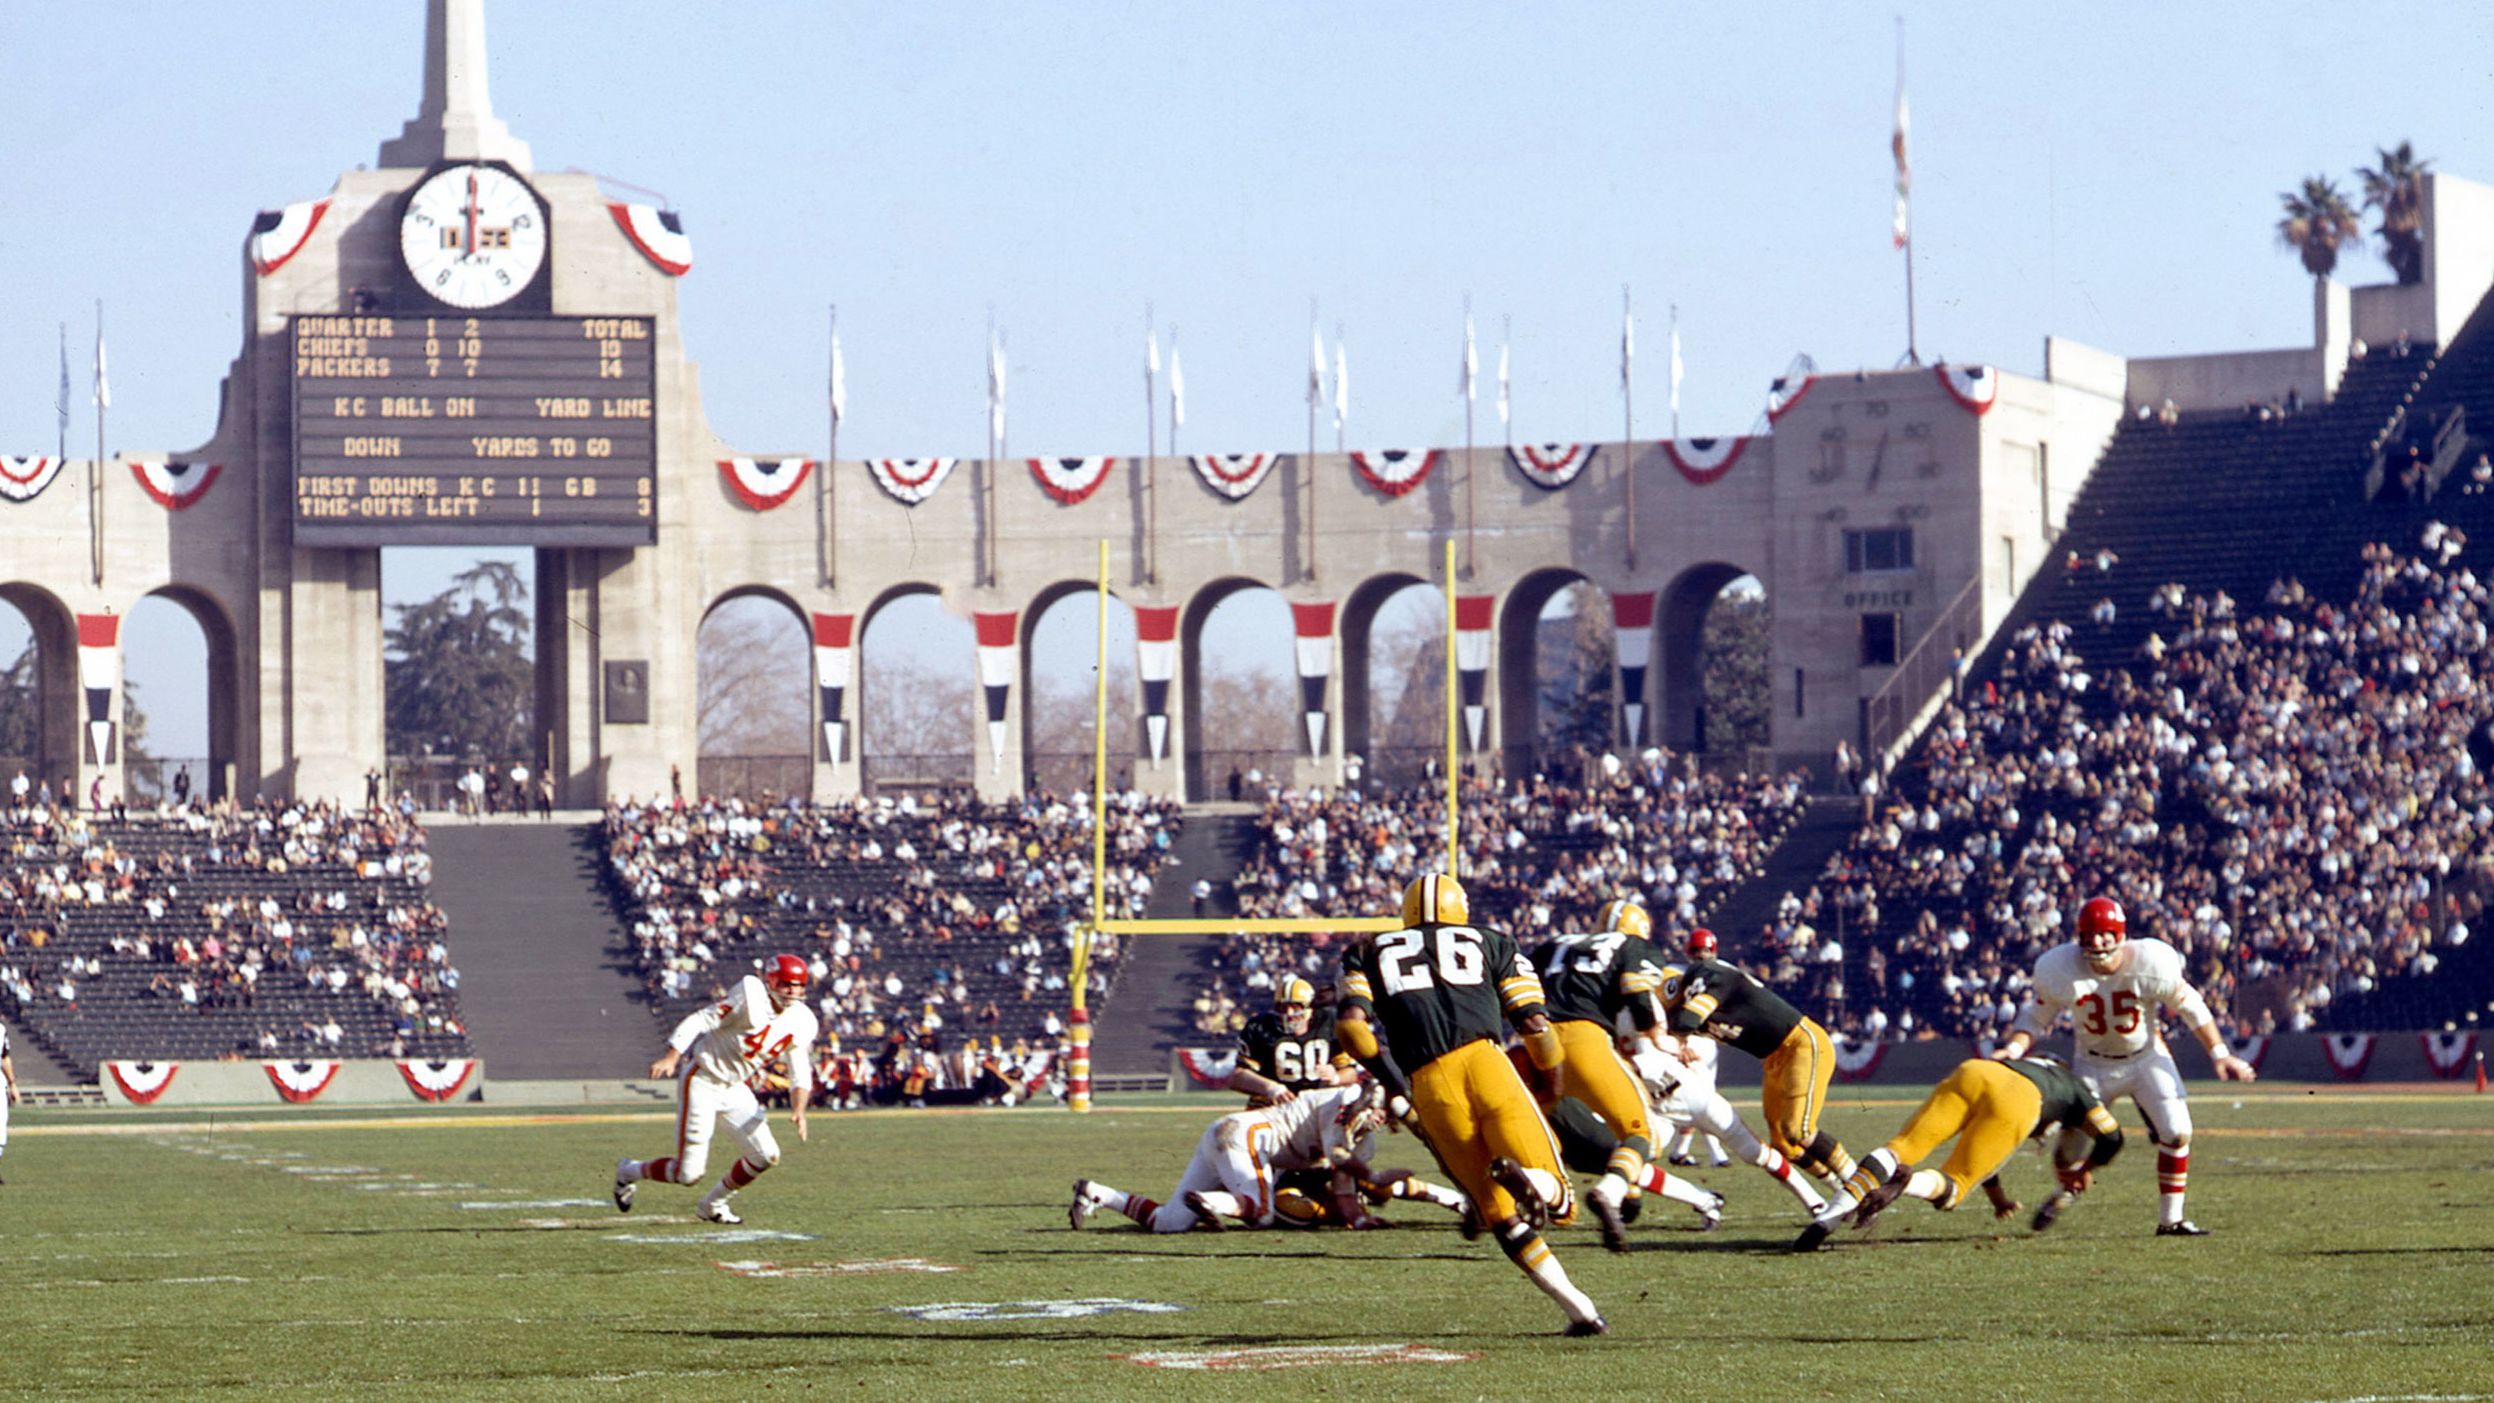 Herb Adderley (No. 26) returns a kickoff during the game. Adderley, a Hall of Fame cornerback, played nine seasons with the Packers.